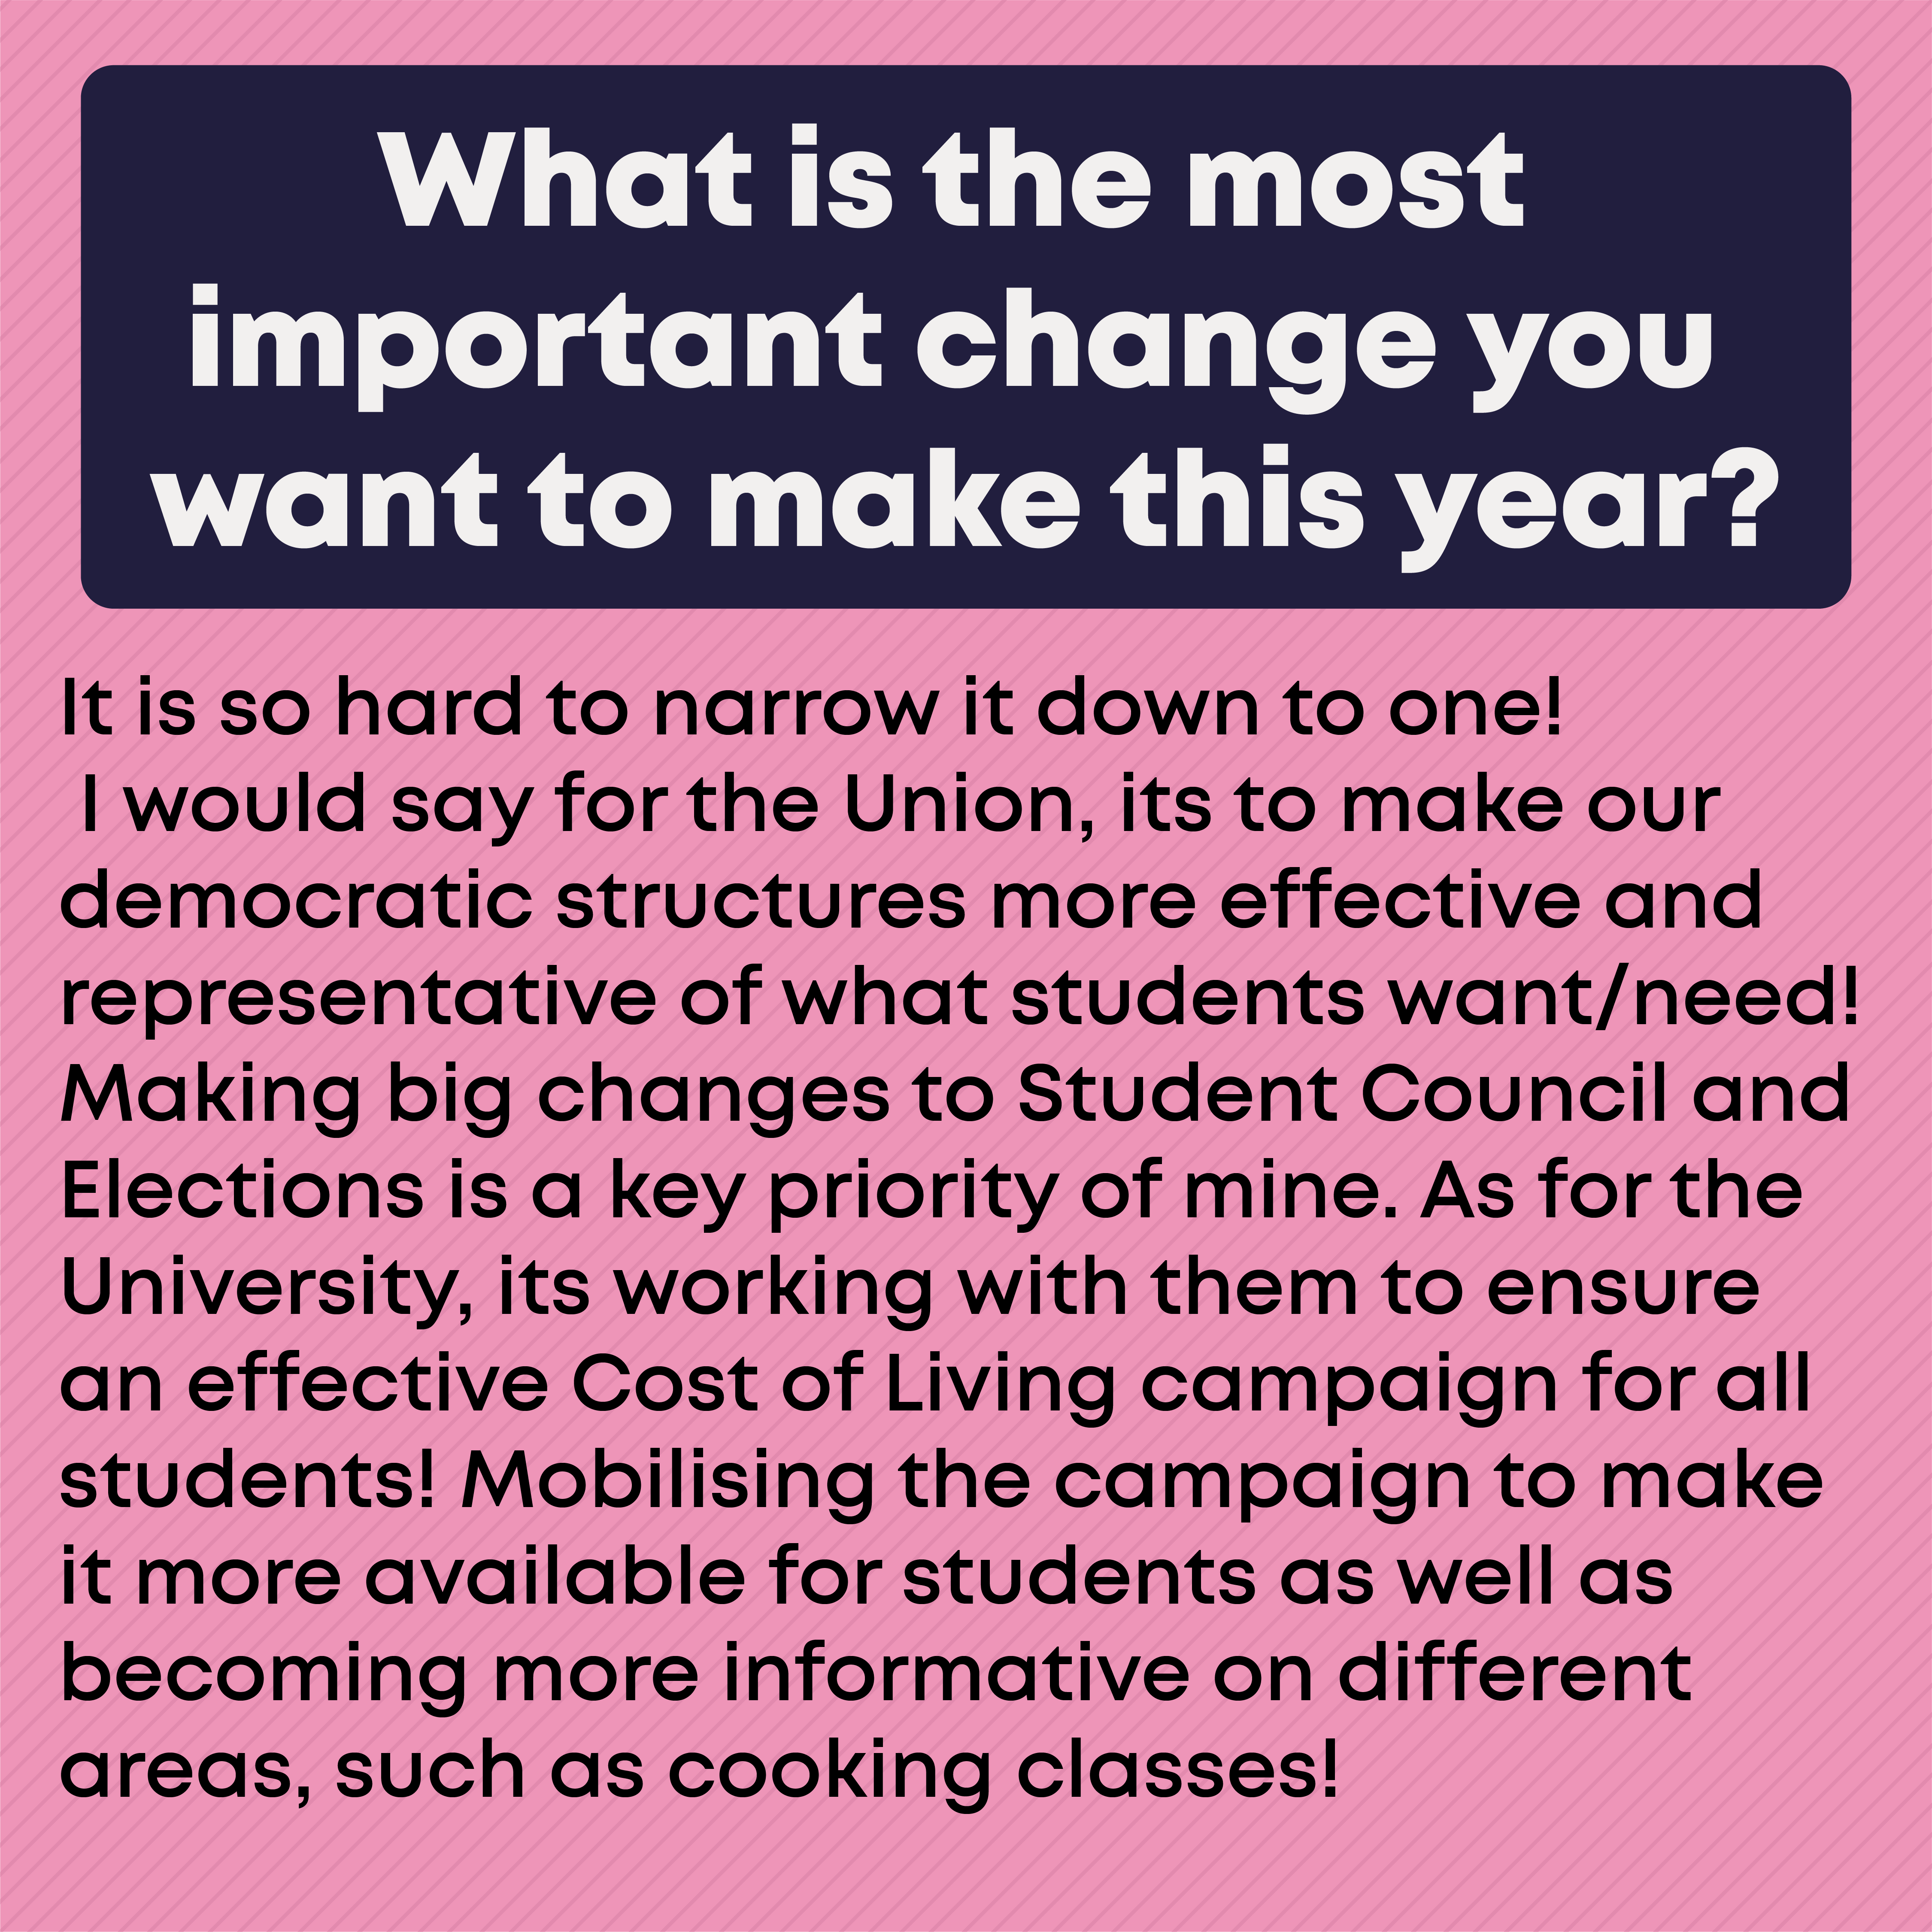 What is the most important change you want to make this year? It is so hard to narrow it down to one! I would say for the Union, its to make our democratic structures more effective and representative of what students want/need! Making big changes to Student Council and Elections is a key priority of mine. As for the University, its working with them to ensure an effective Cost of Living campaign for all students! Mobilising the campaign to make it more available for students as well as becoming more informative on different areas, such as cooking classes!